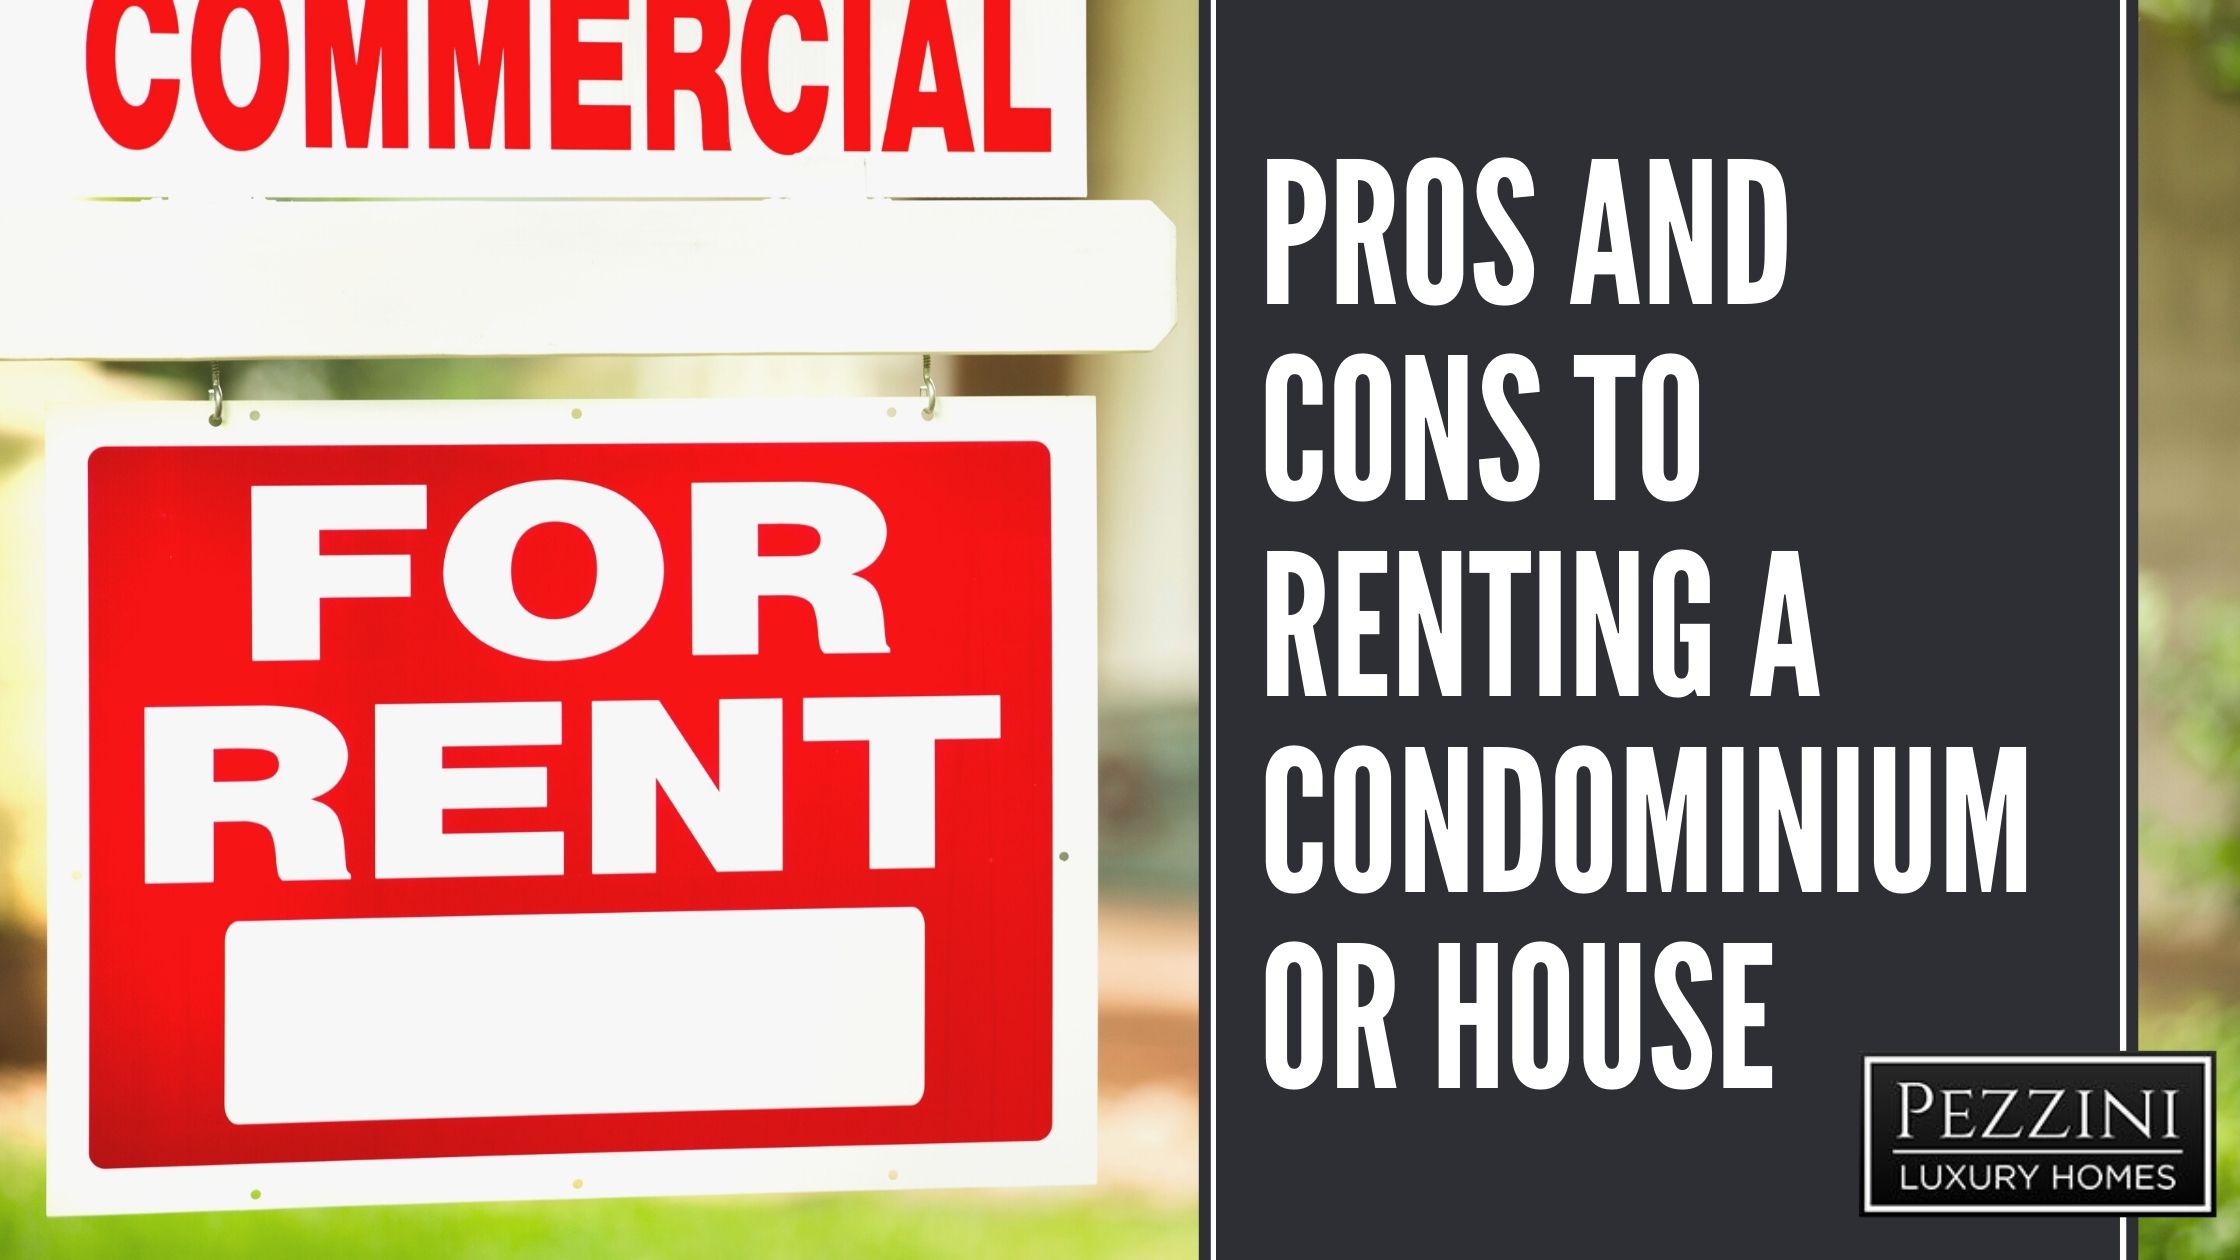 Pros and Cons to Renting a Condominium or House